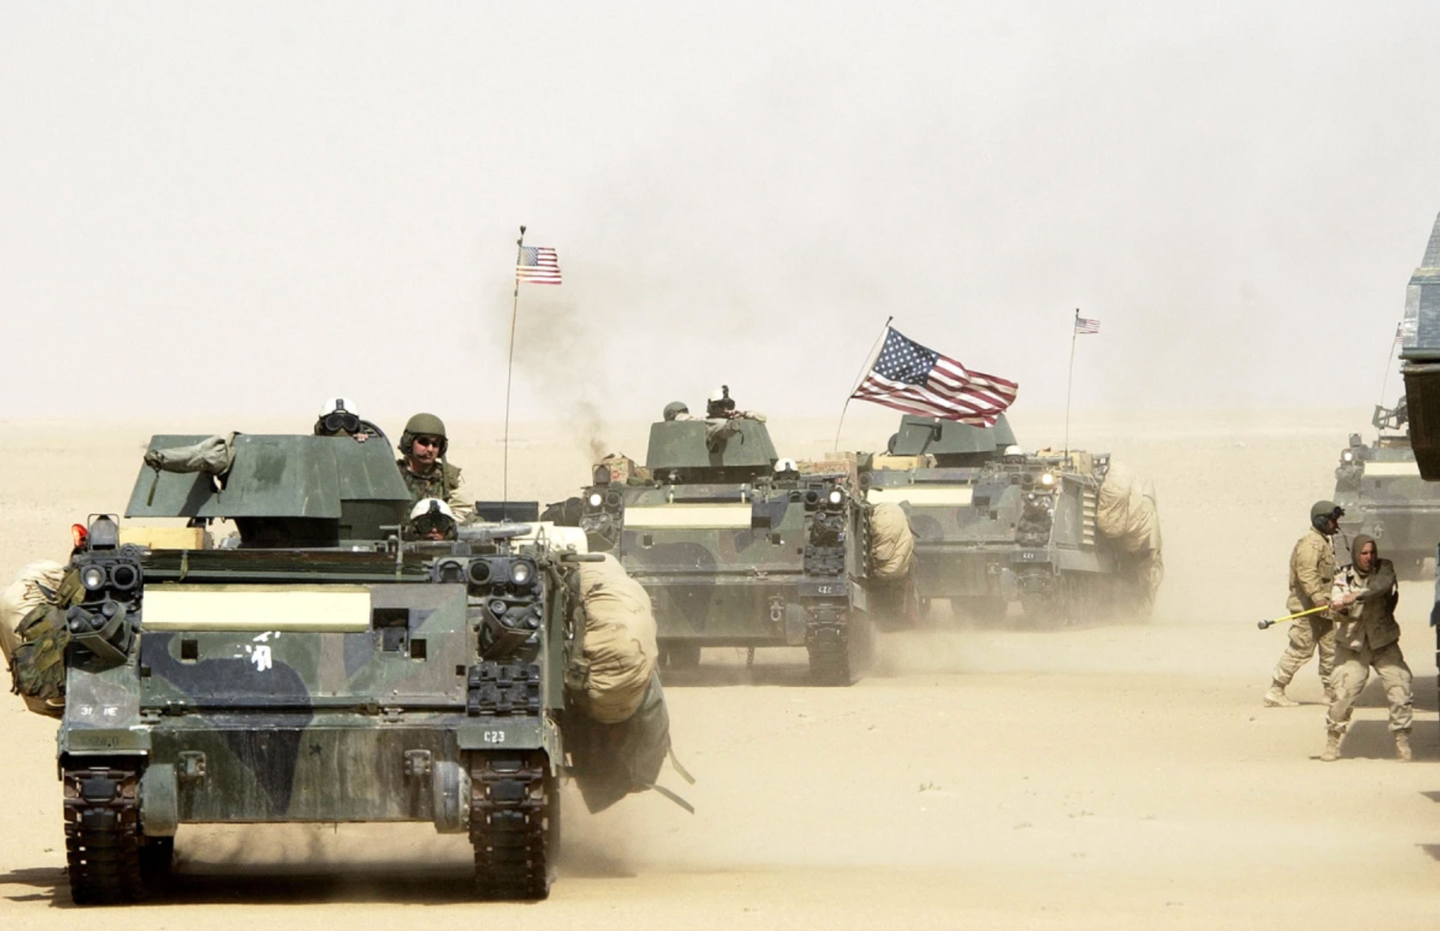 A convoy of U.S. Army 3rd Infantry Task Force 3-7 armored vehicles manuvers during a training exercise near the Iraqi border March 13th, 2003 in northern Kuwait.